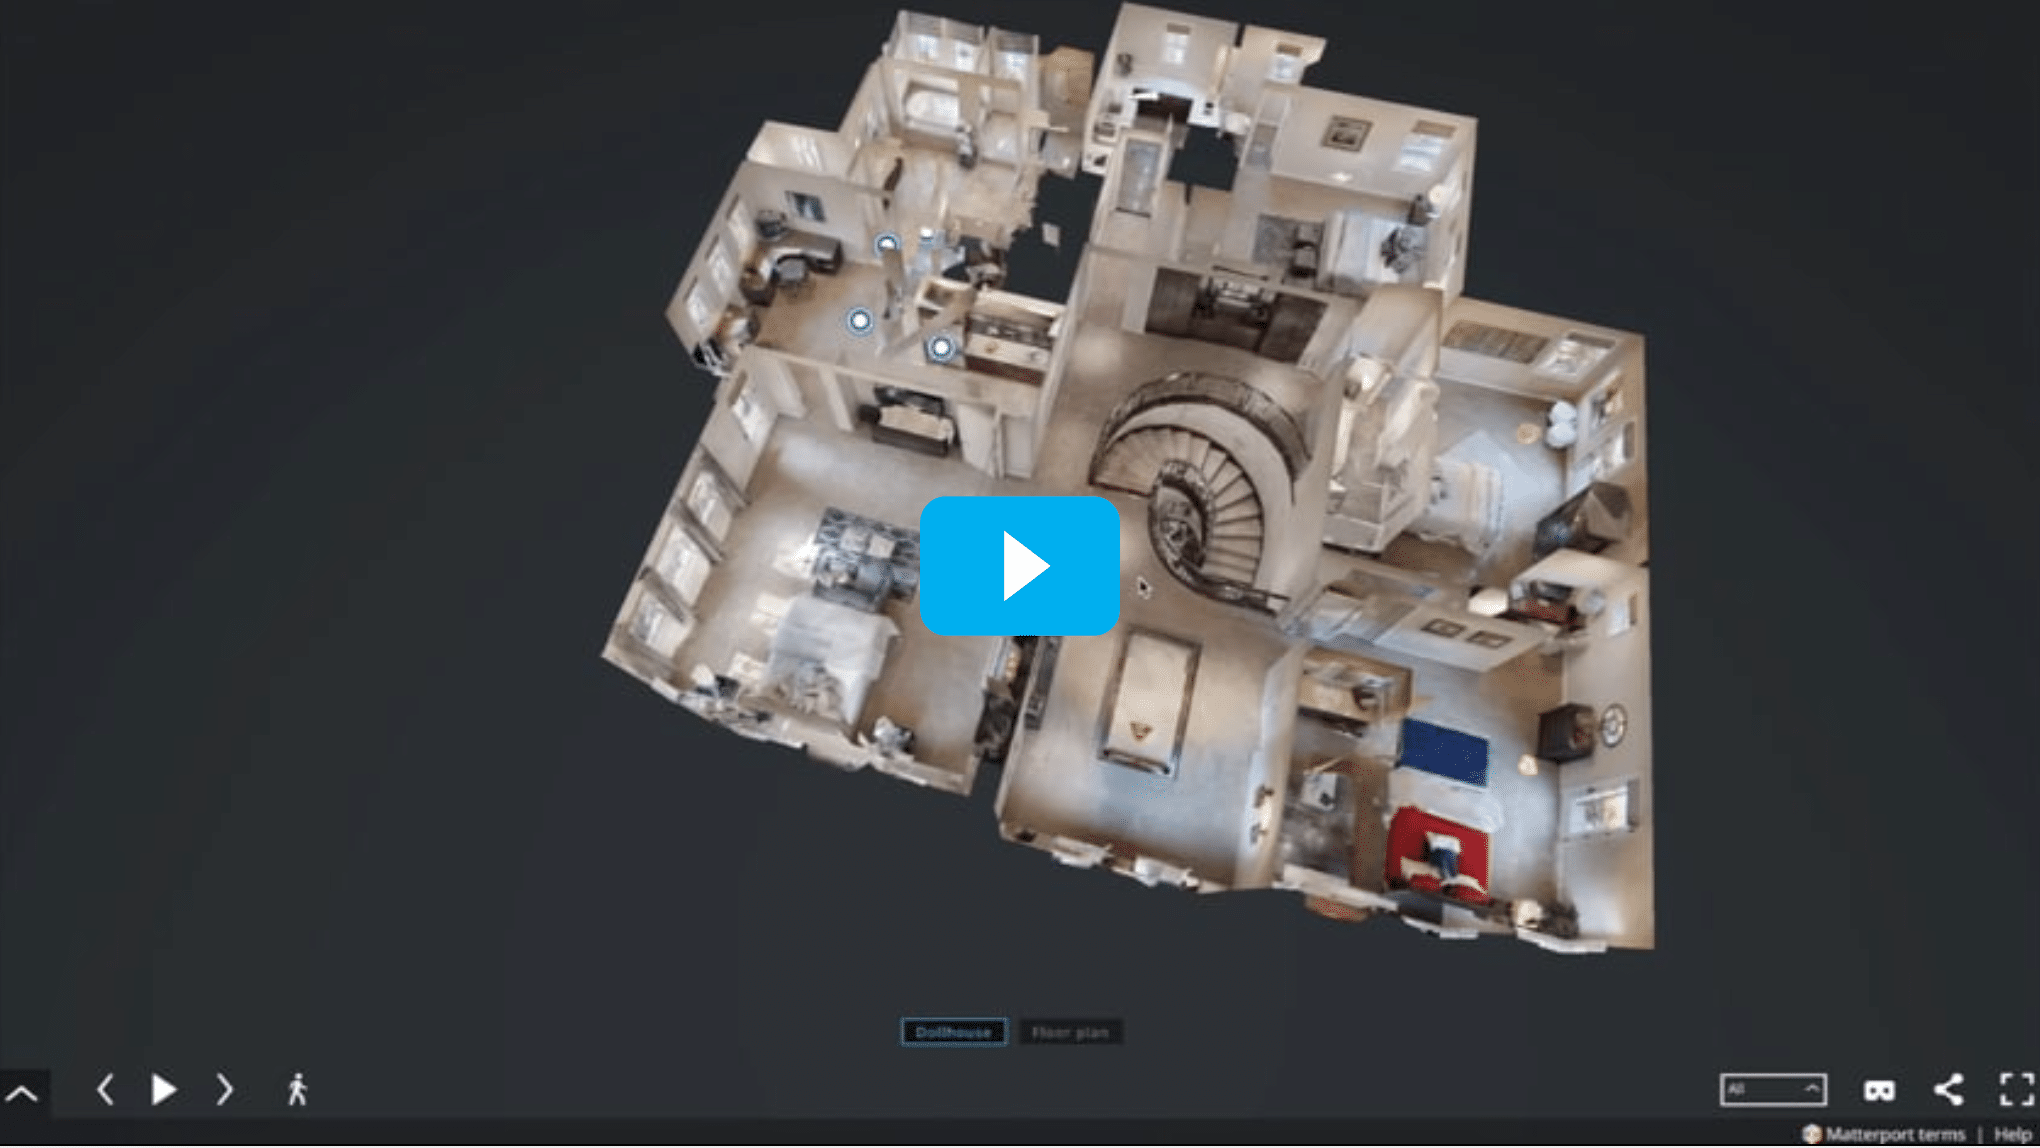 Dollhouse View Of 3D Matterport Tour With Blue Play Button Over House Image On Black Background